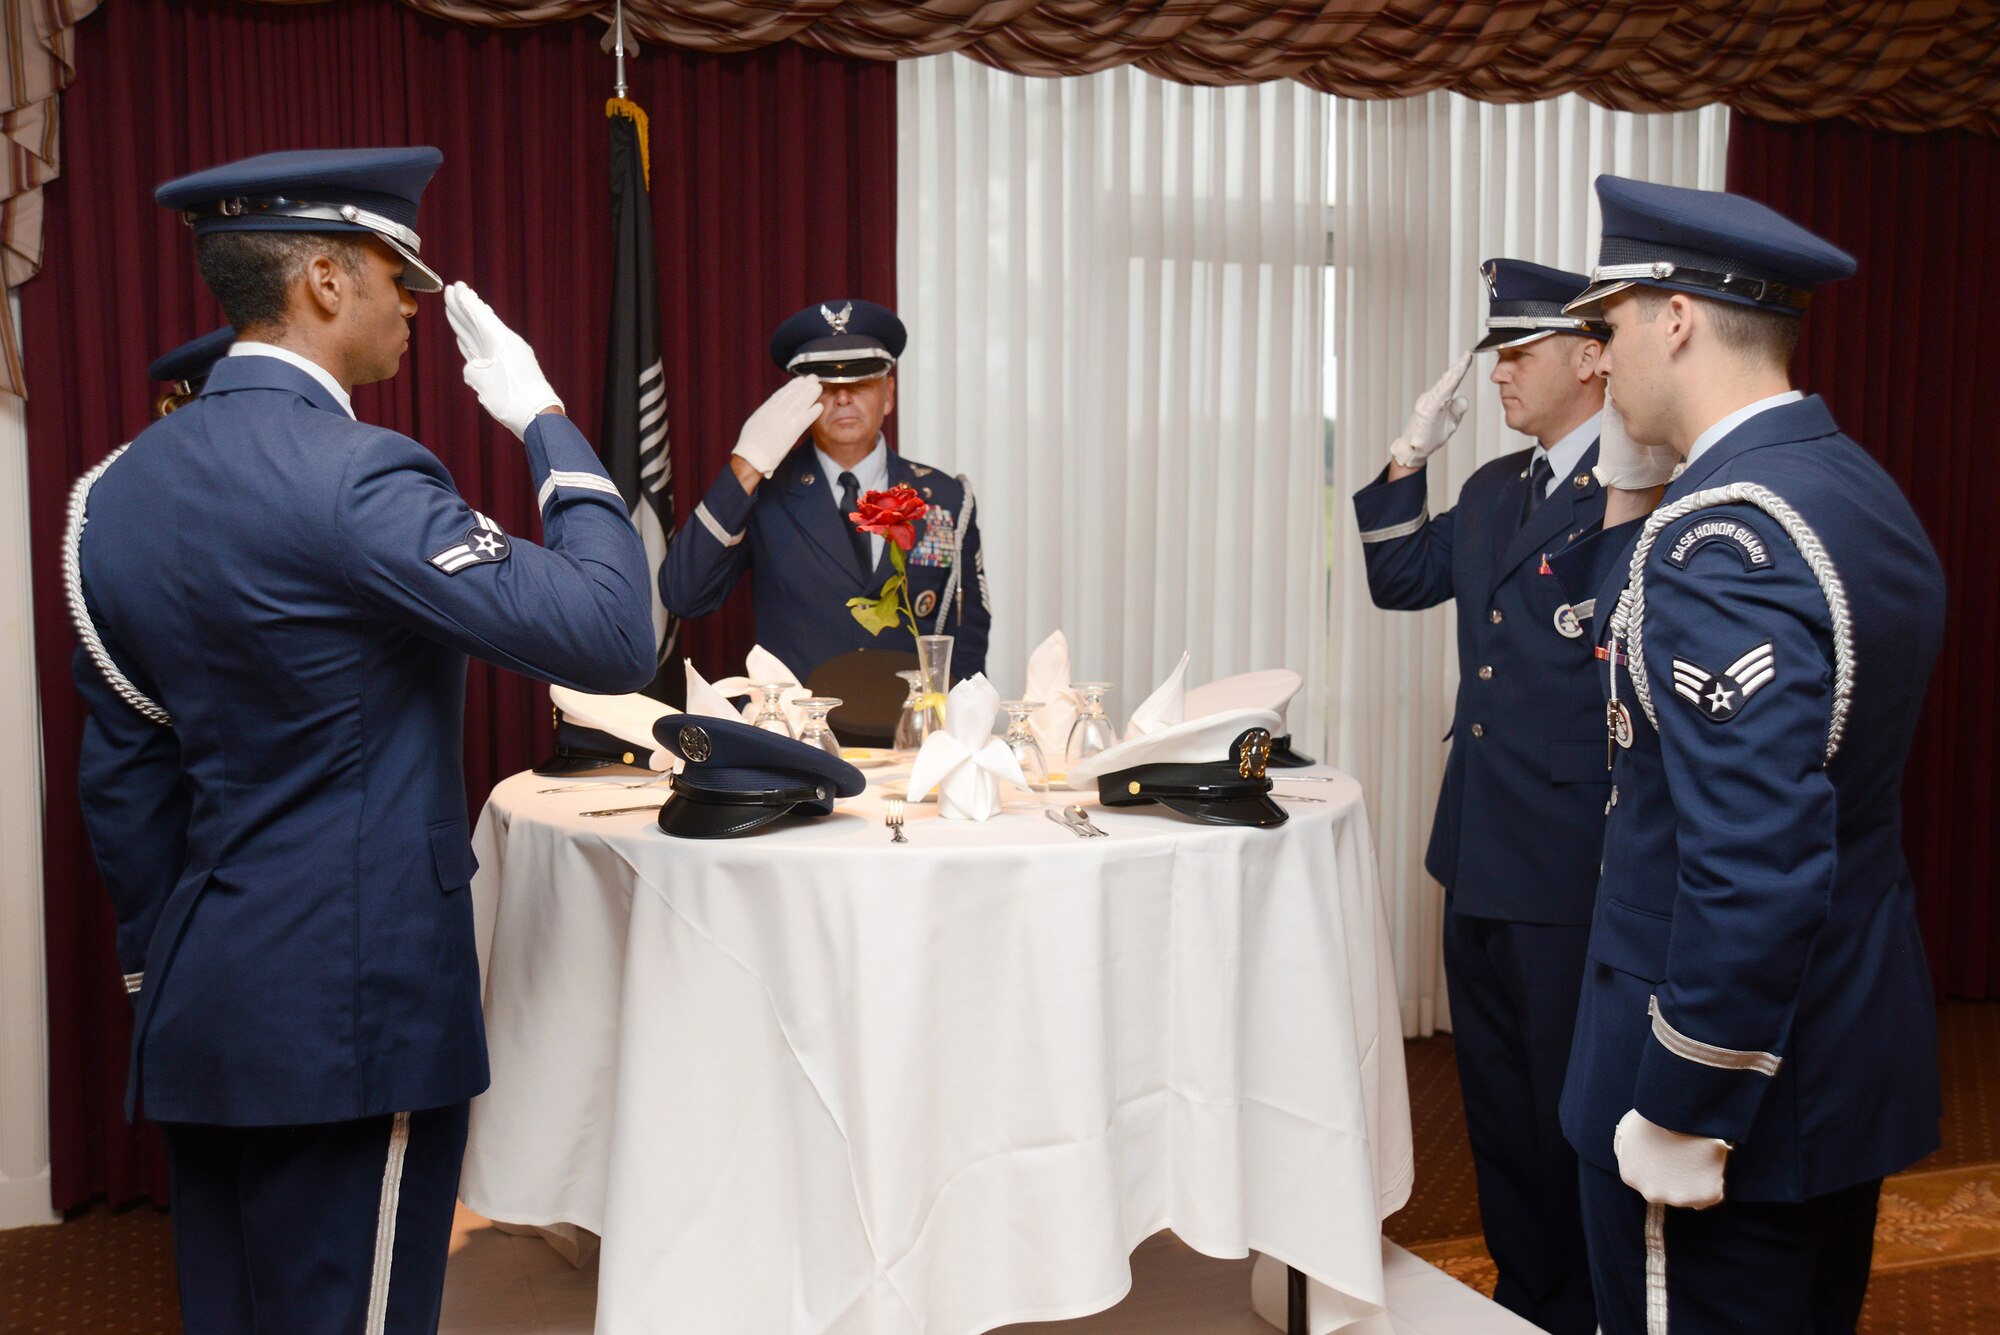 Members of the Tinker Honor Guard perform the POW/MIA Ceremony during the Sept. 9 breakfast. The ceremony is steeped in significance, with every item from the table to the rose, being symbolic of the sacrifices of those who were captured or of those who never returned home.  (Air Force photo by Kelly White)